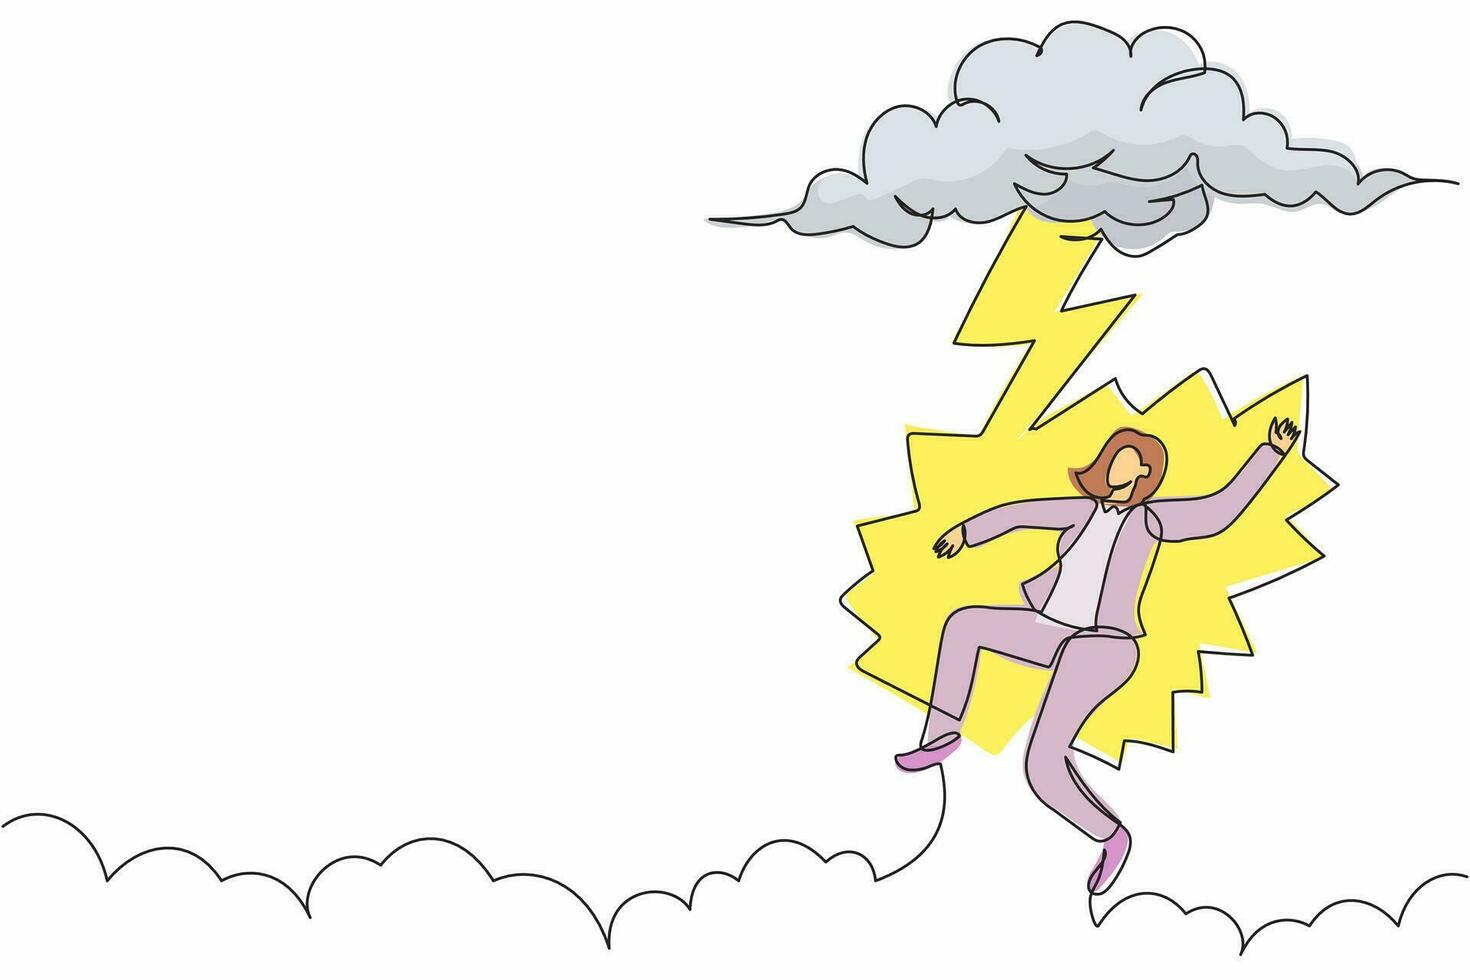 Single continuous line drawing unlucky businesswoman struck by lightning or thunder from cloud. Feel bad luck in business. Misery, disaster, risk, danger. One line graphic design vector illustration